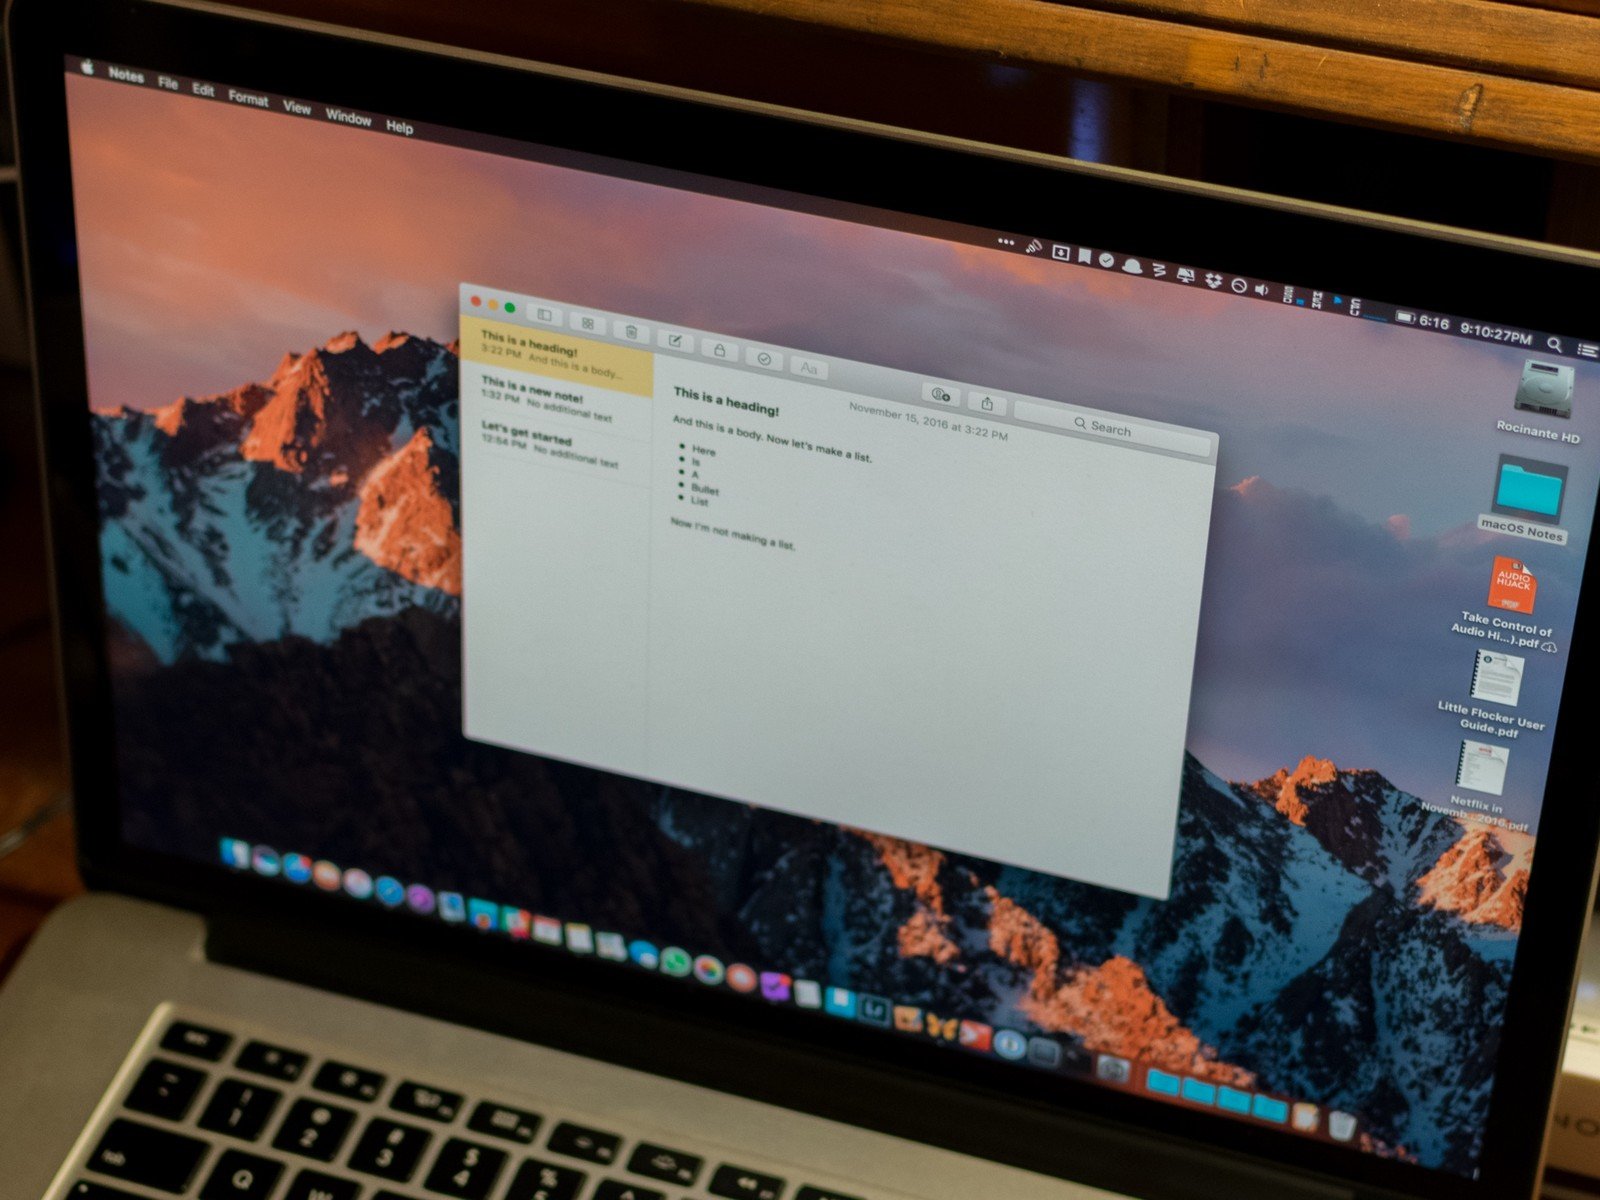 what does mac cleaner malware do?